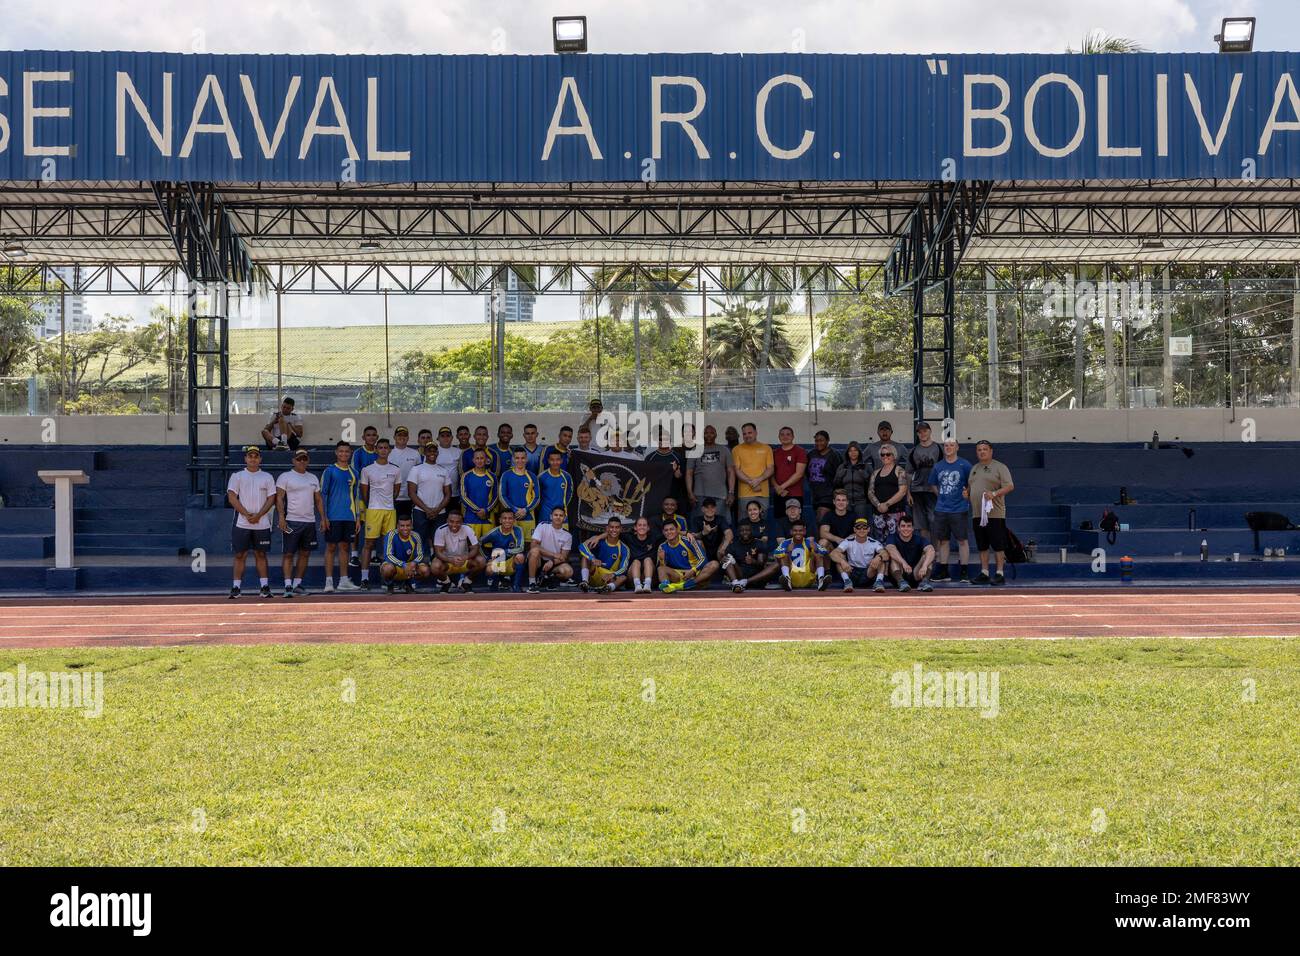 220817-M-JX780-1147  CARTAGENA, Colombia - (Aug. 17, 2022) – Sailors assigned to the Spearhead-class expeditionary fast transport vessel USNS Burlington (T-EPF-10), and Colombian sailors pose for a group photo following a soccer match while the ship is inport Cargenata, Colombia, Aug. 17, 2022.. The soccer match was held to develop camaraderie between the U.S. and Colombian personnel. Burlington is deployed to the U.S. 4th Fleet area of operations to support expeditionary maintenance to deployed littoral combat ships operating in the region and conduct theater security cooperation engagements Stock Photo